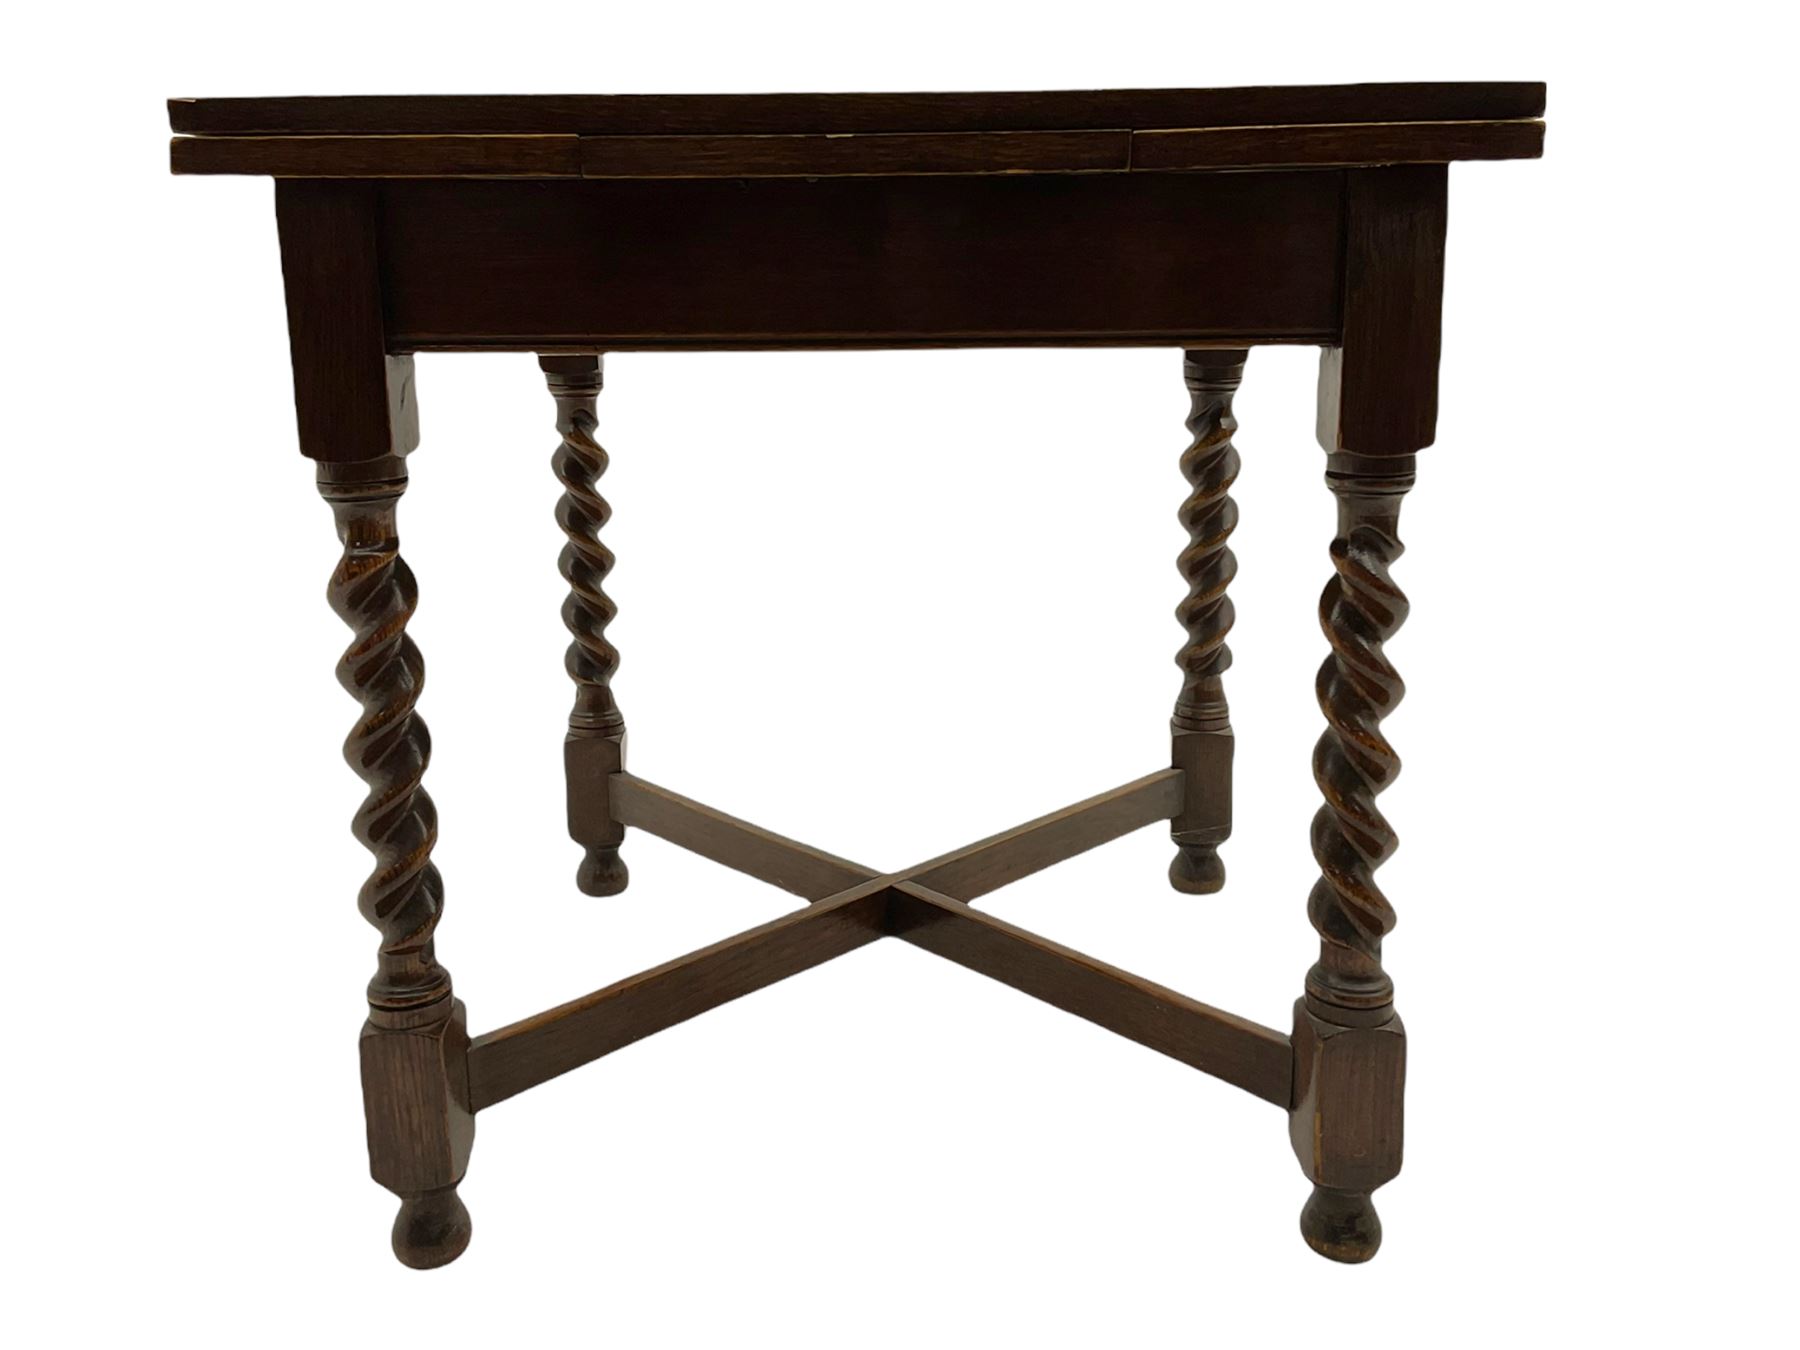 Early 20th century oak barley twist drawer leaf dining table - Image 2 of 10